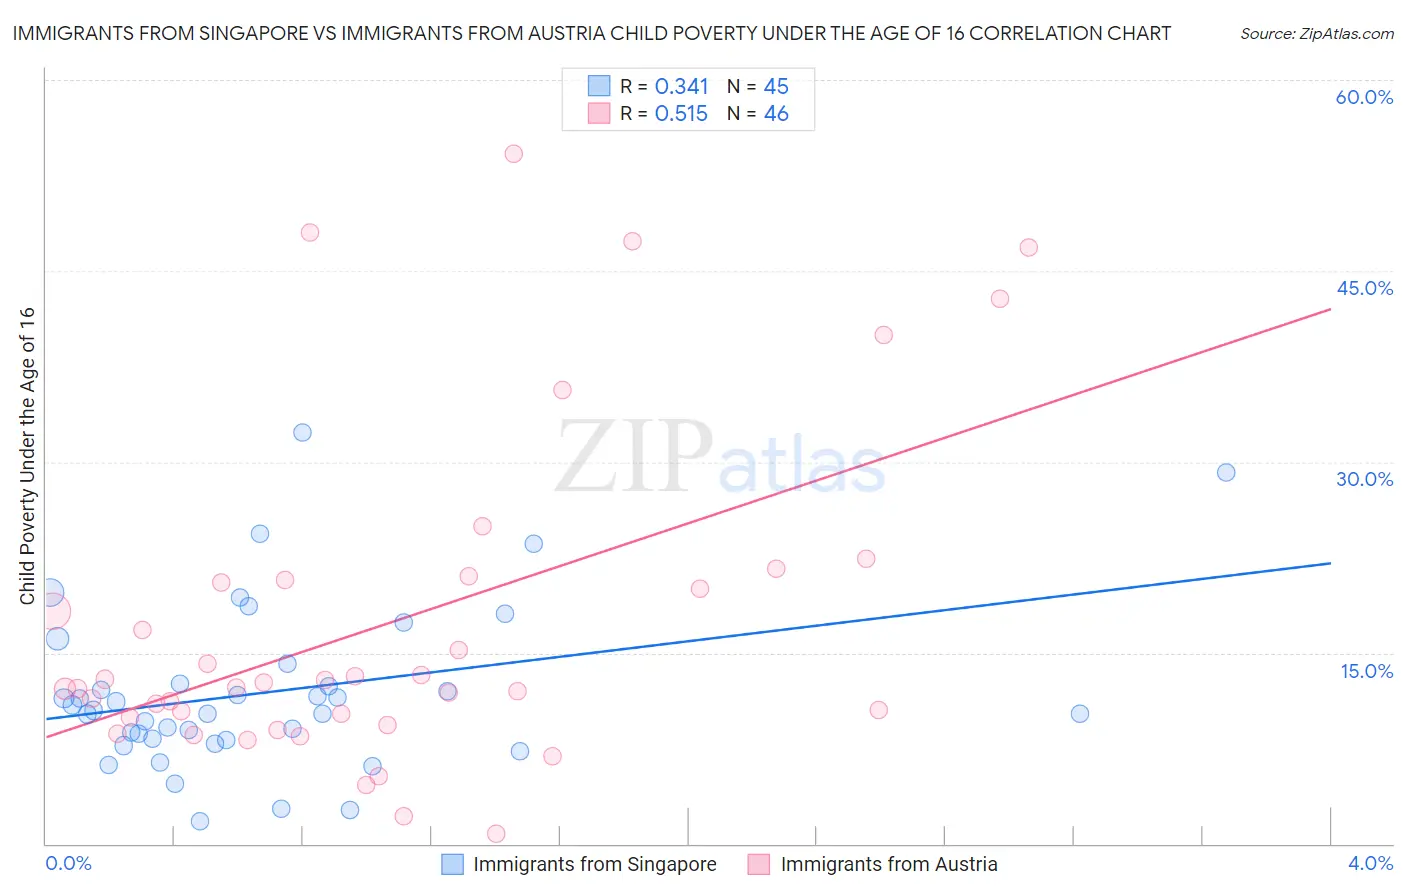 Immigrants from Singapore vs Immigrants from Austria Child Poverty Under the Age of 16